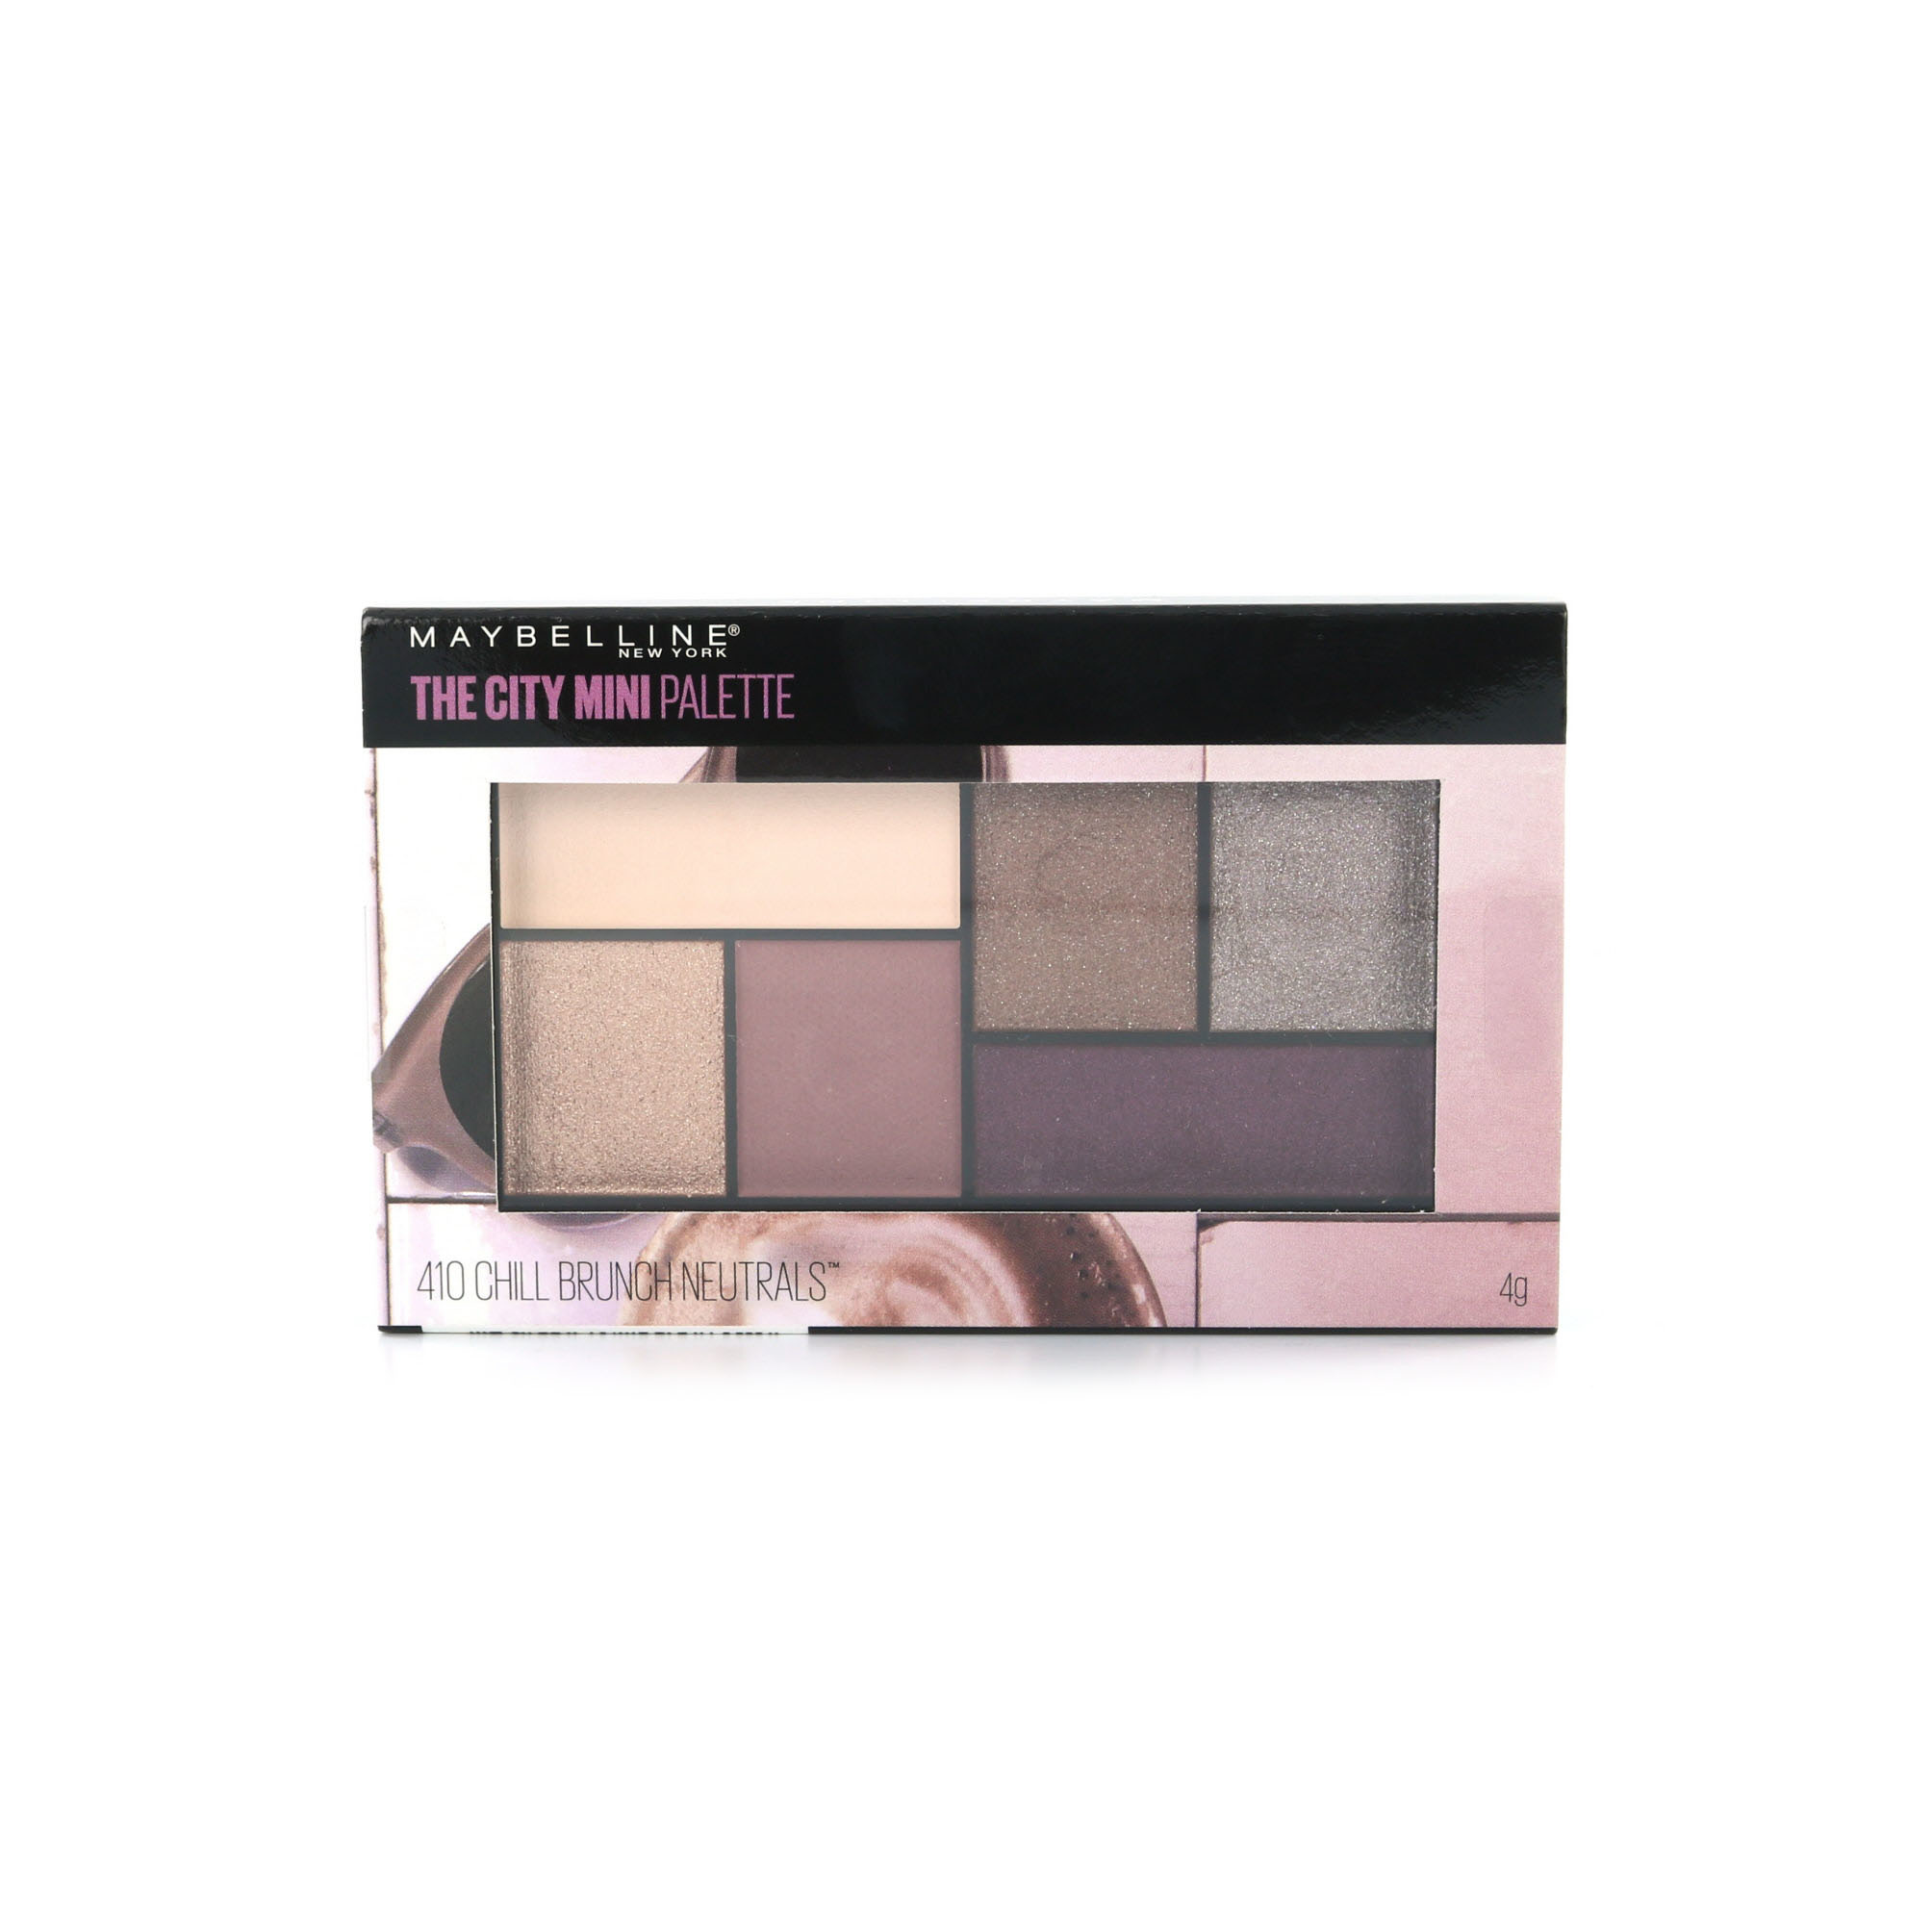 Maybelline The City Mini Palette Yeux - 410 Chill Brunch Neutrals